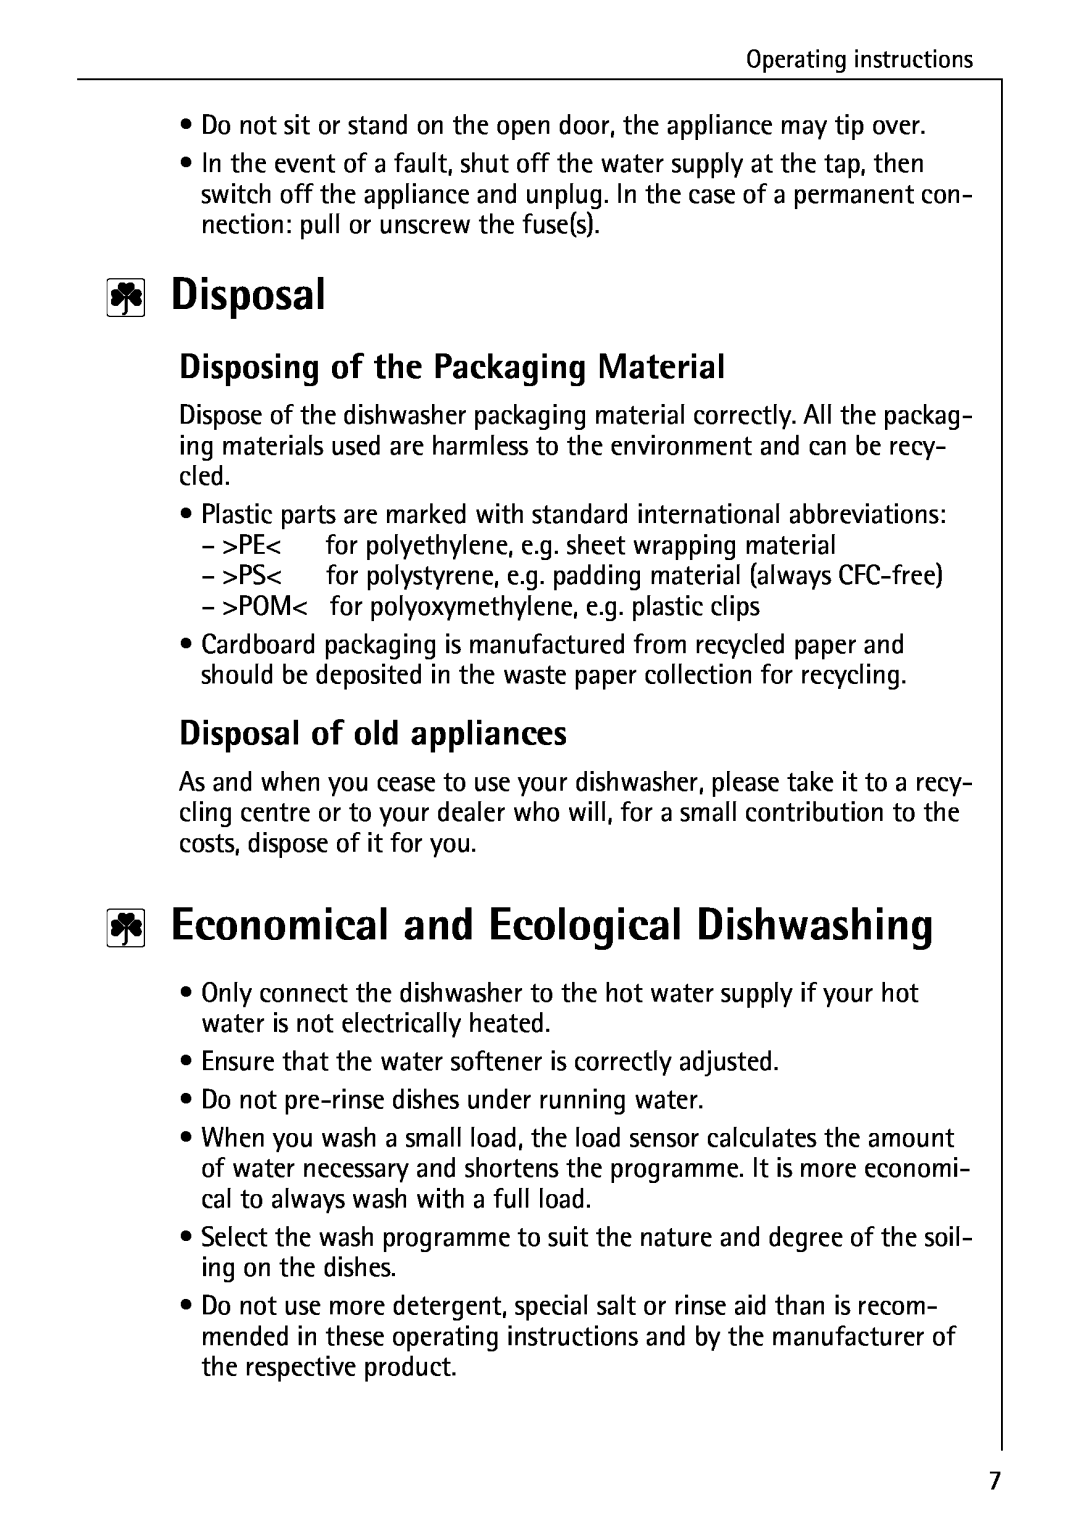 AEG 4270 I manual Disposal, Economical and Ecological Dishwashing, Disposing of the Packaging Material 